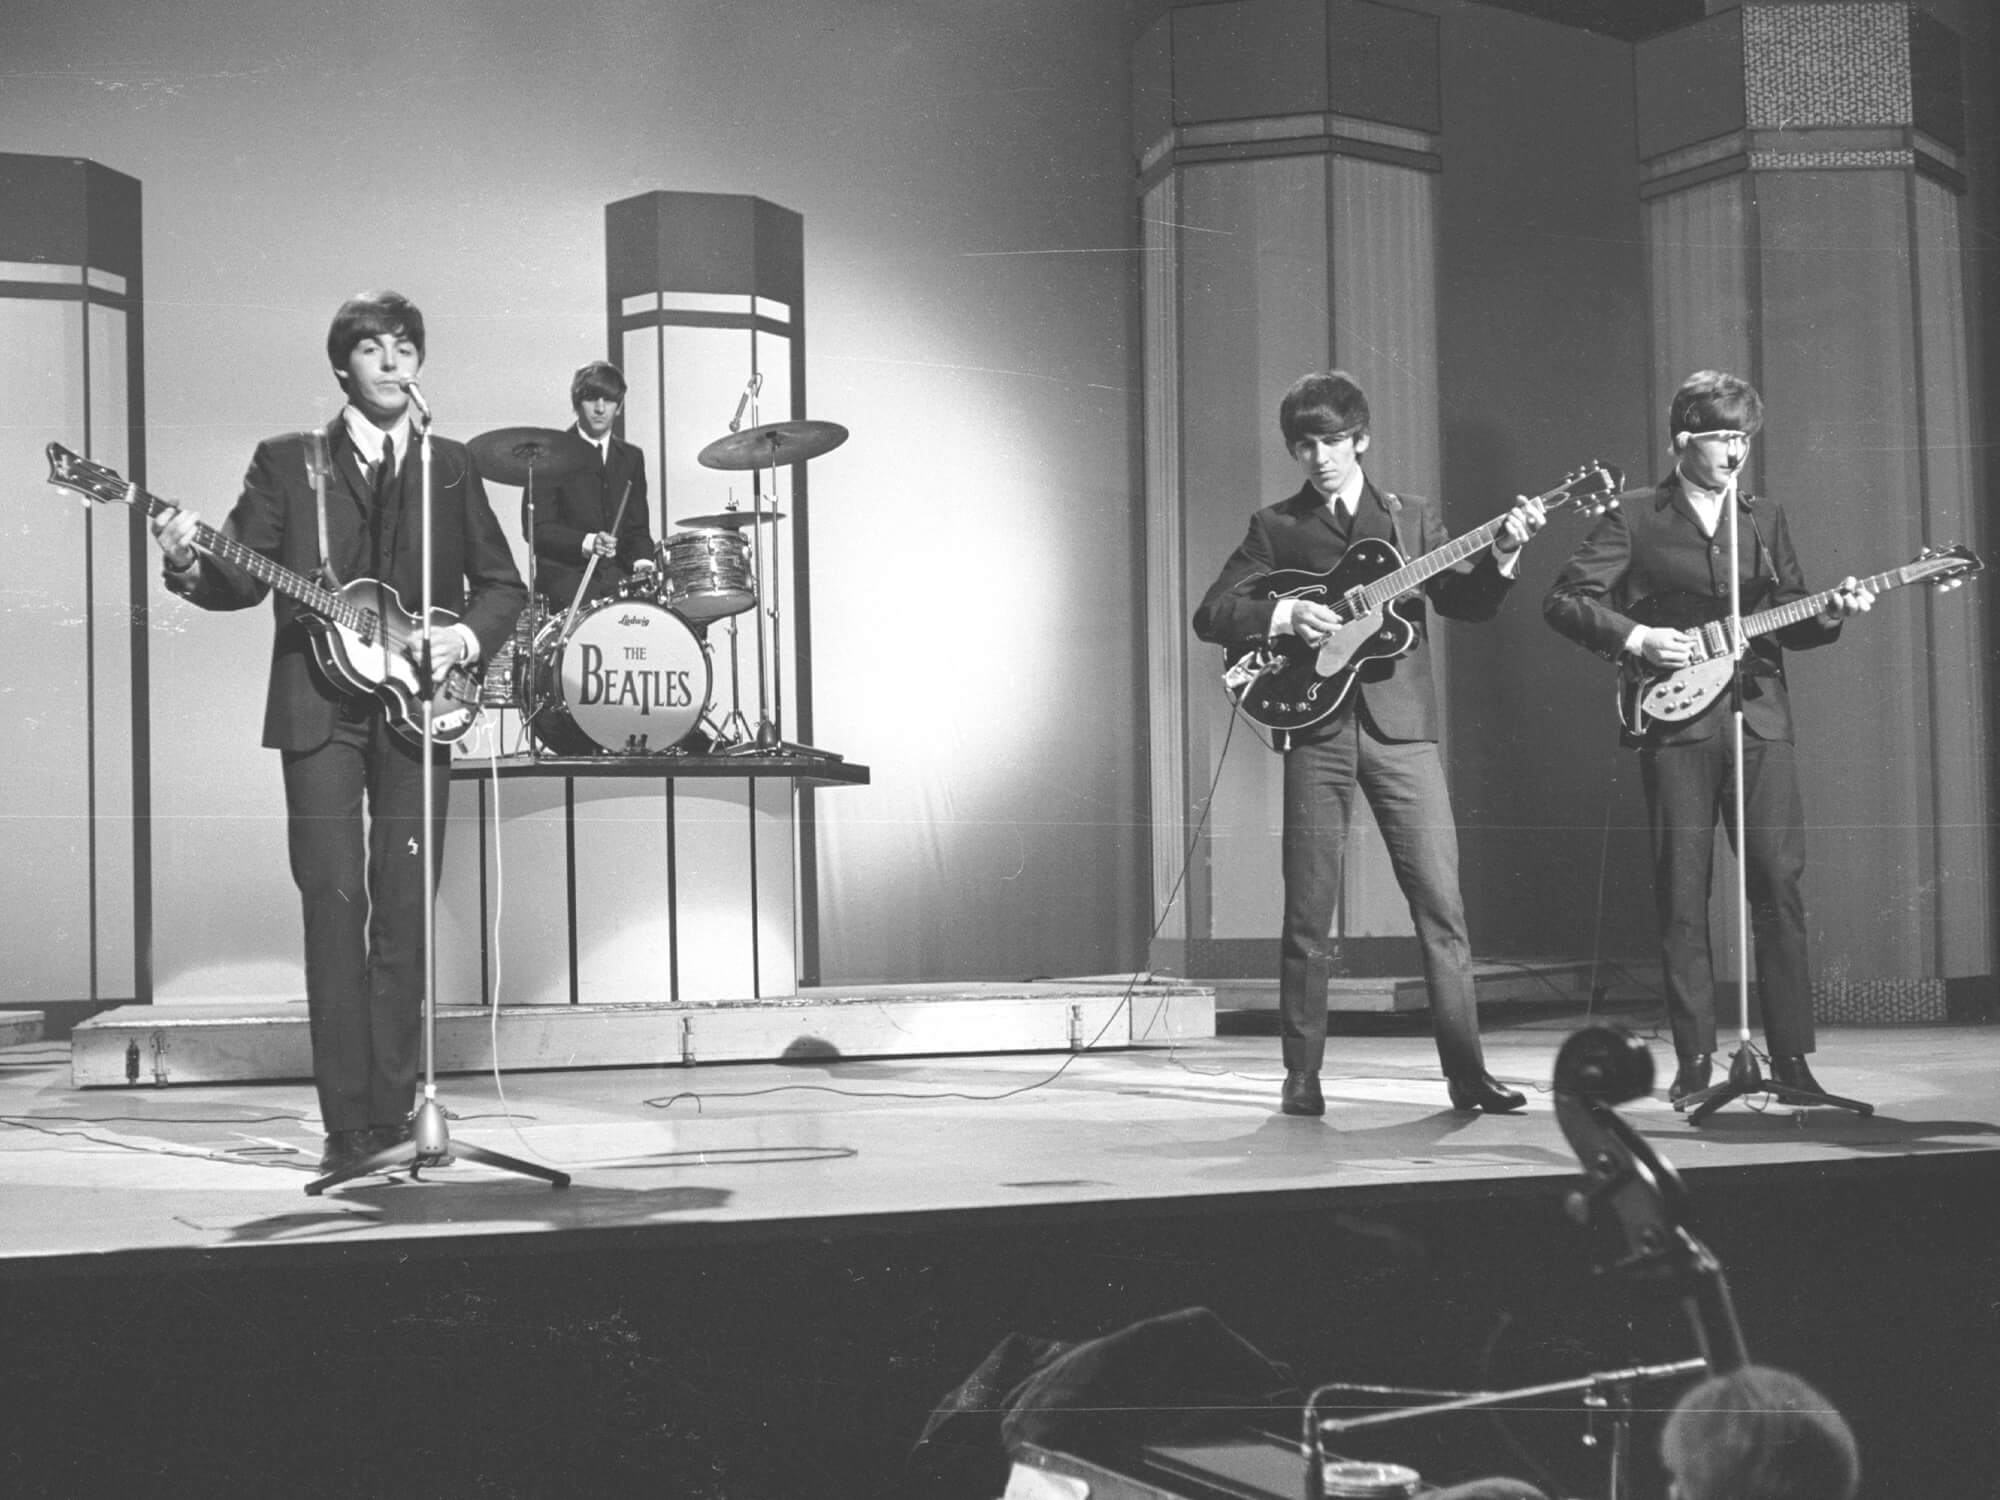 Black and white archival photo of The Beatles on stage.